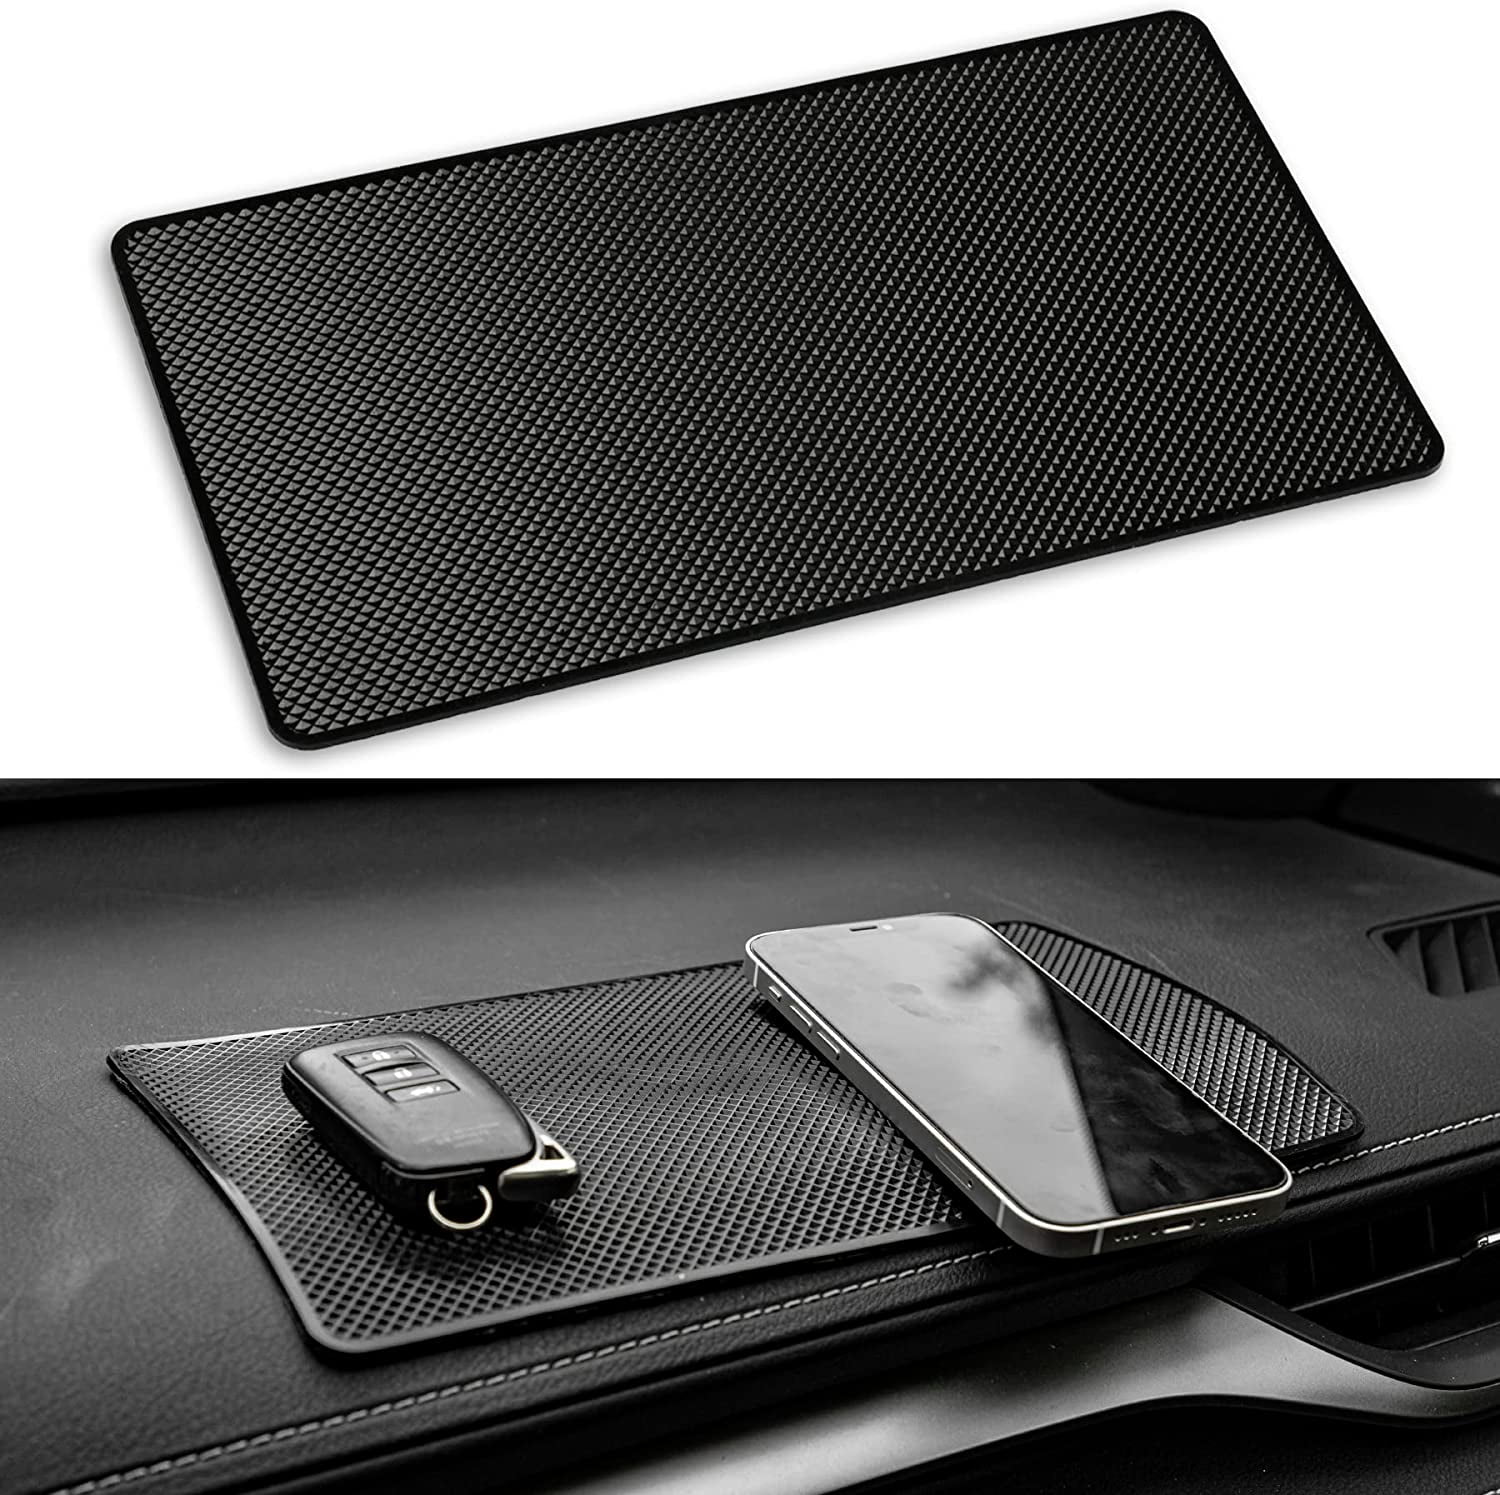 1pc Anti-slip Rubber Mat For Car Dashboard, 10.6 X 5.9 Inches Universal Non- slip Magic Sticky Pad For Holding Cellphone, Sunglasses, Keys, And Other  Small Items